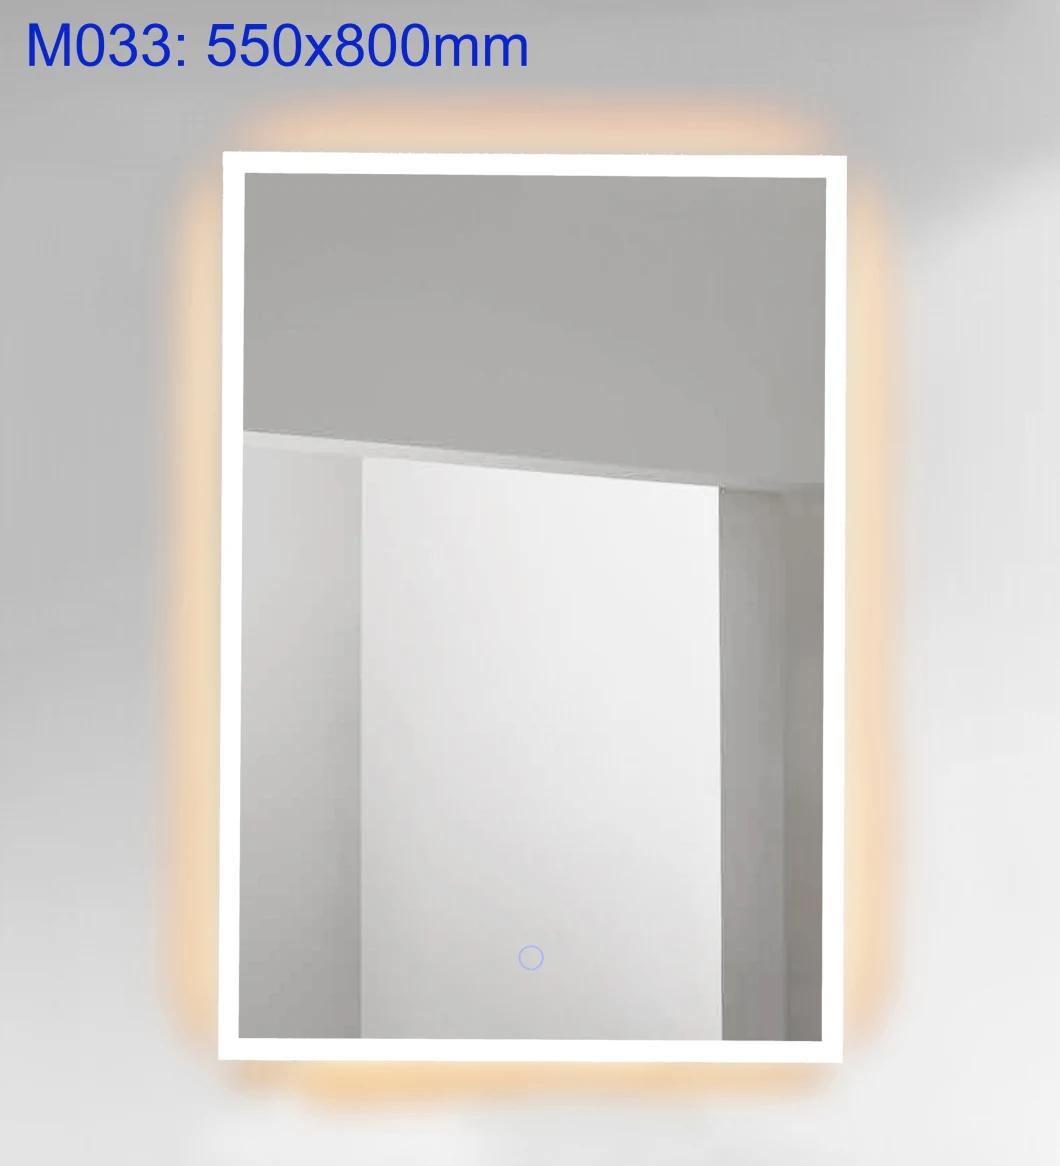 Square Wall Mounted Touch Switch Bathroom Makeup Smart LED Mirror for South American (M017)